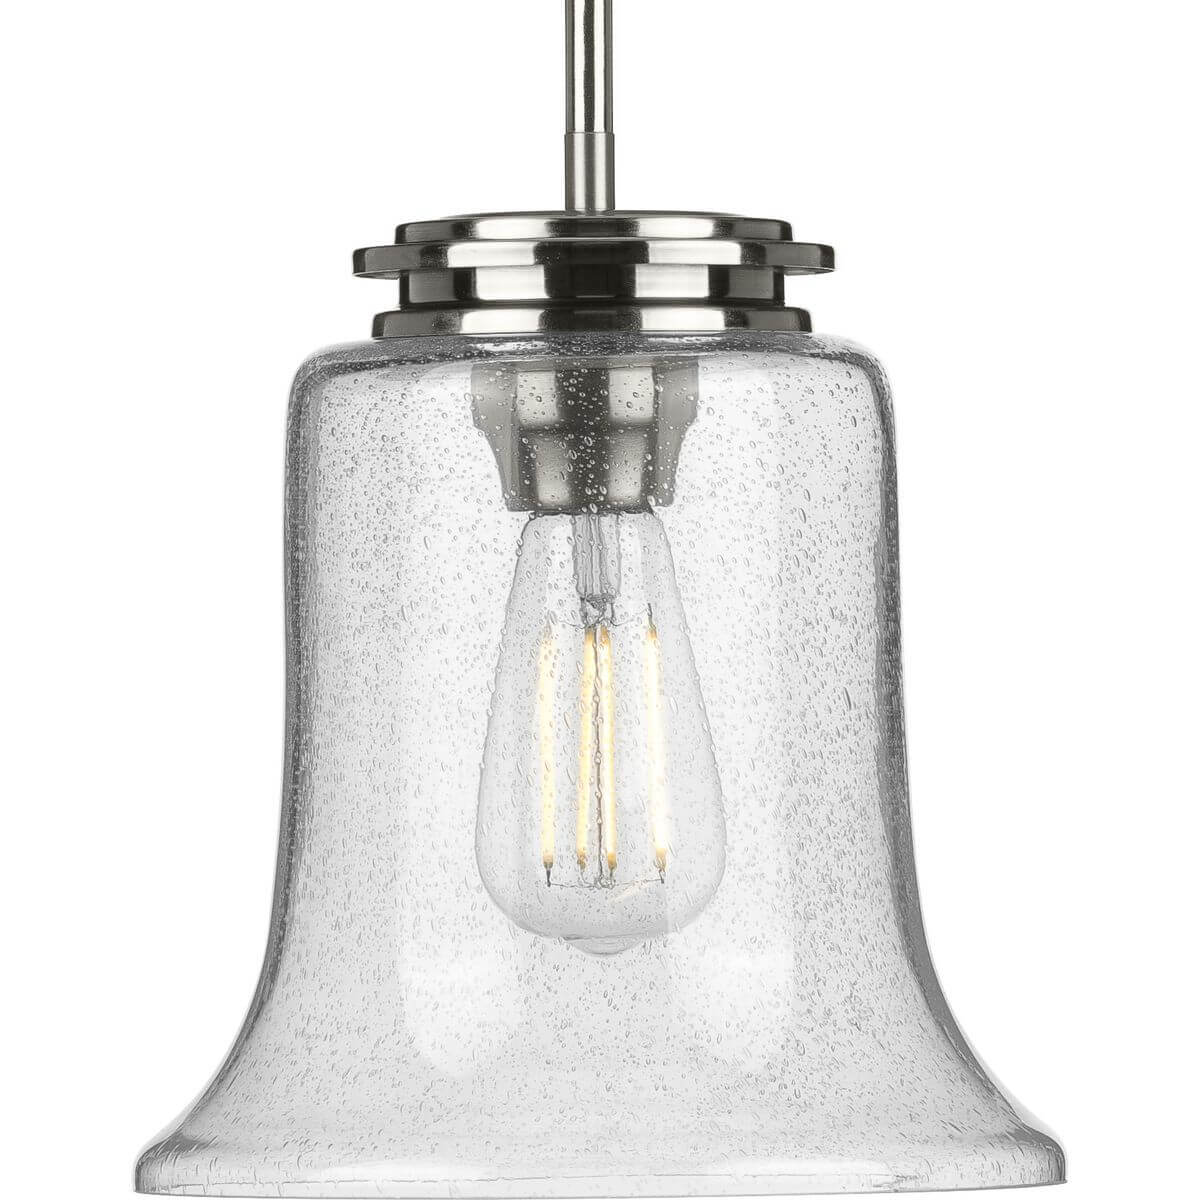 Progress Lighting Winslett 1 Light 9 inch Pendant in Brushed Nickel with Clear Seeded Glass P500238-009